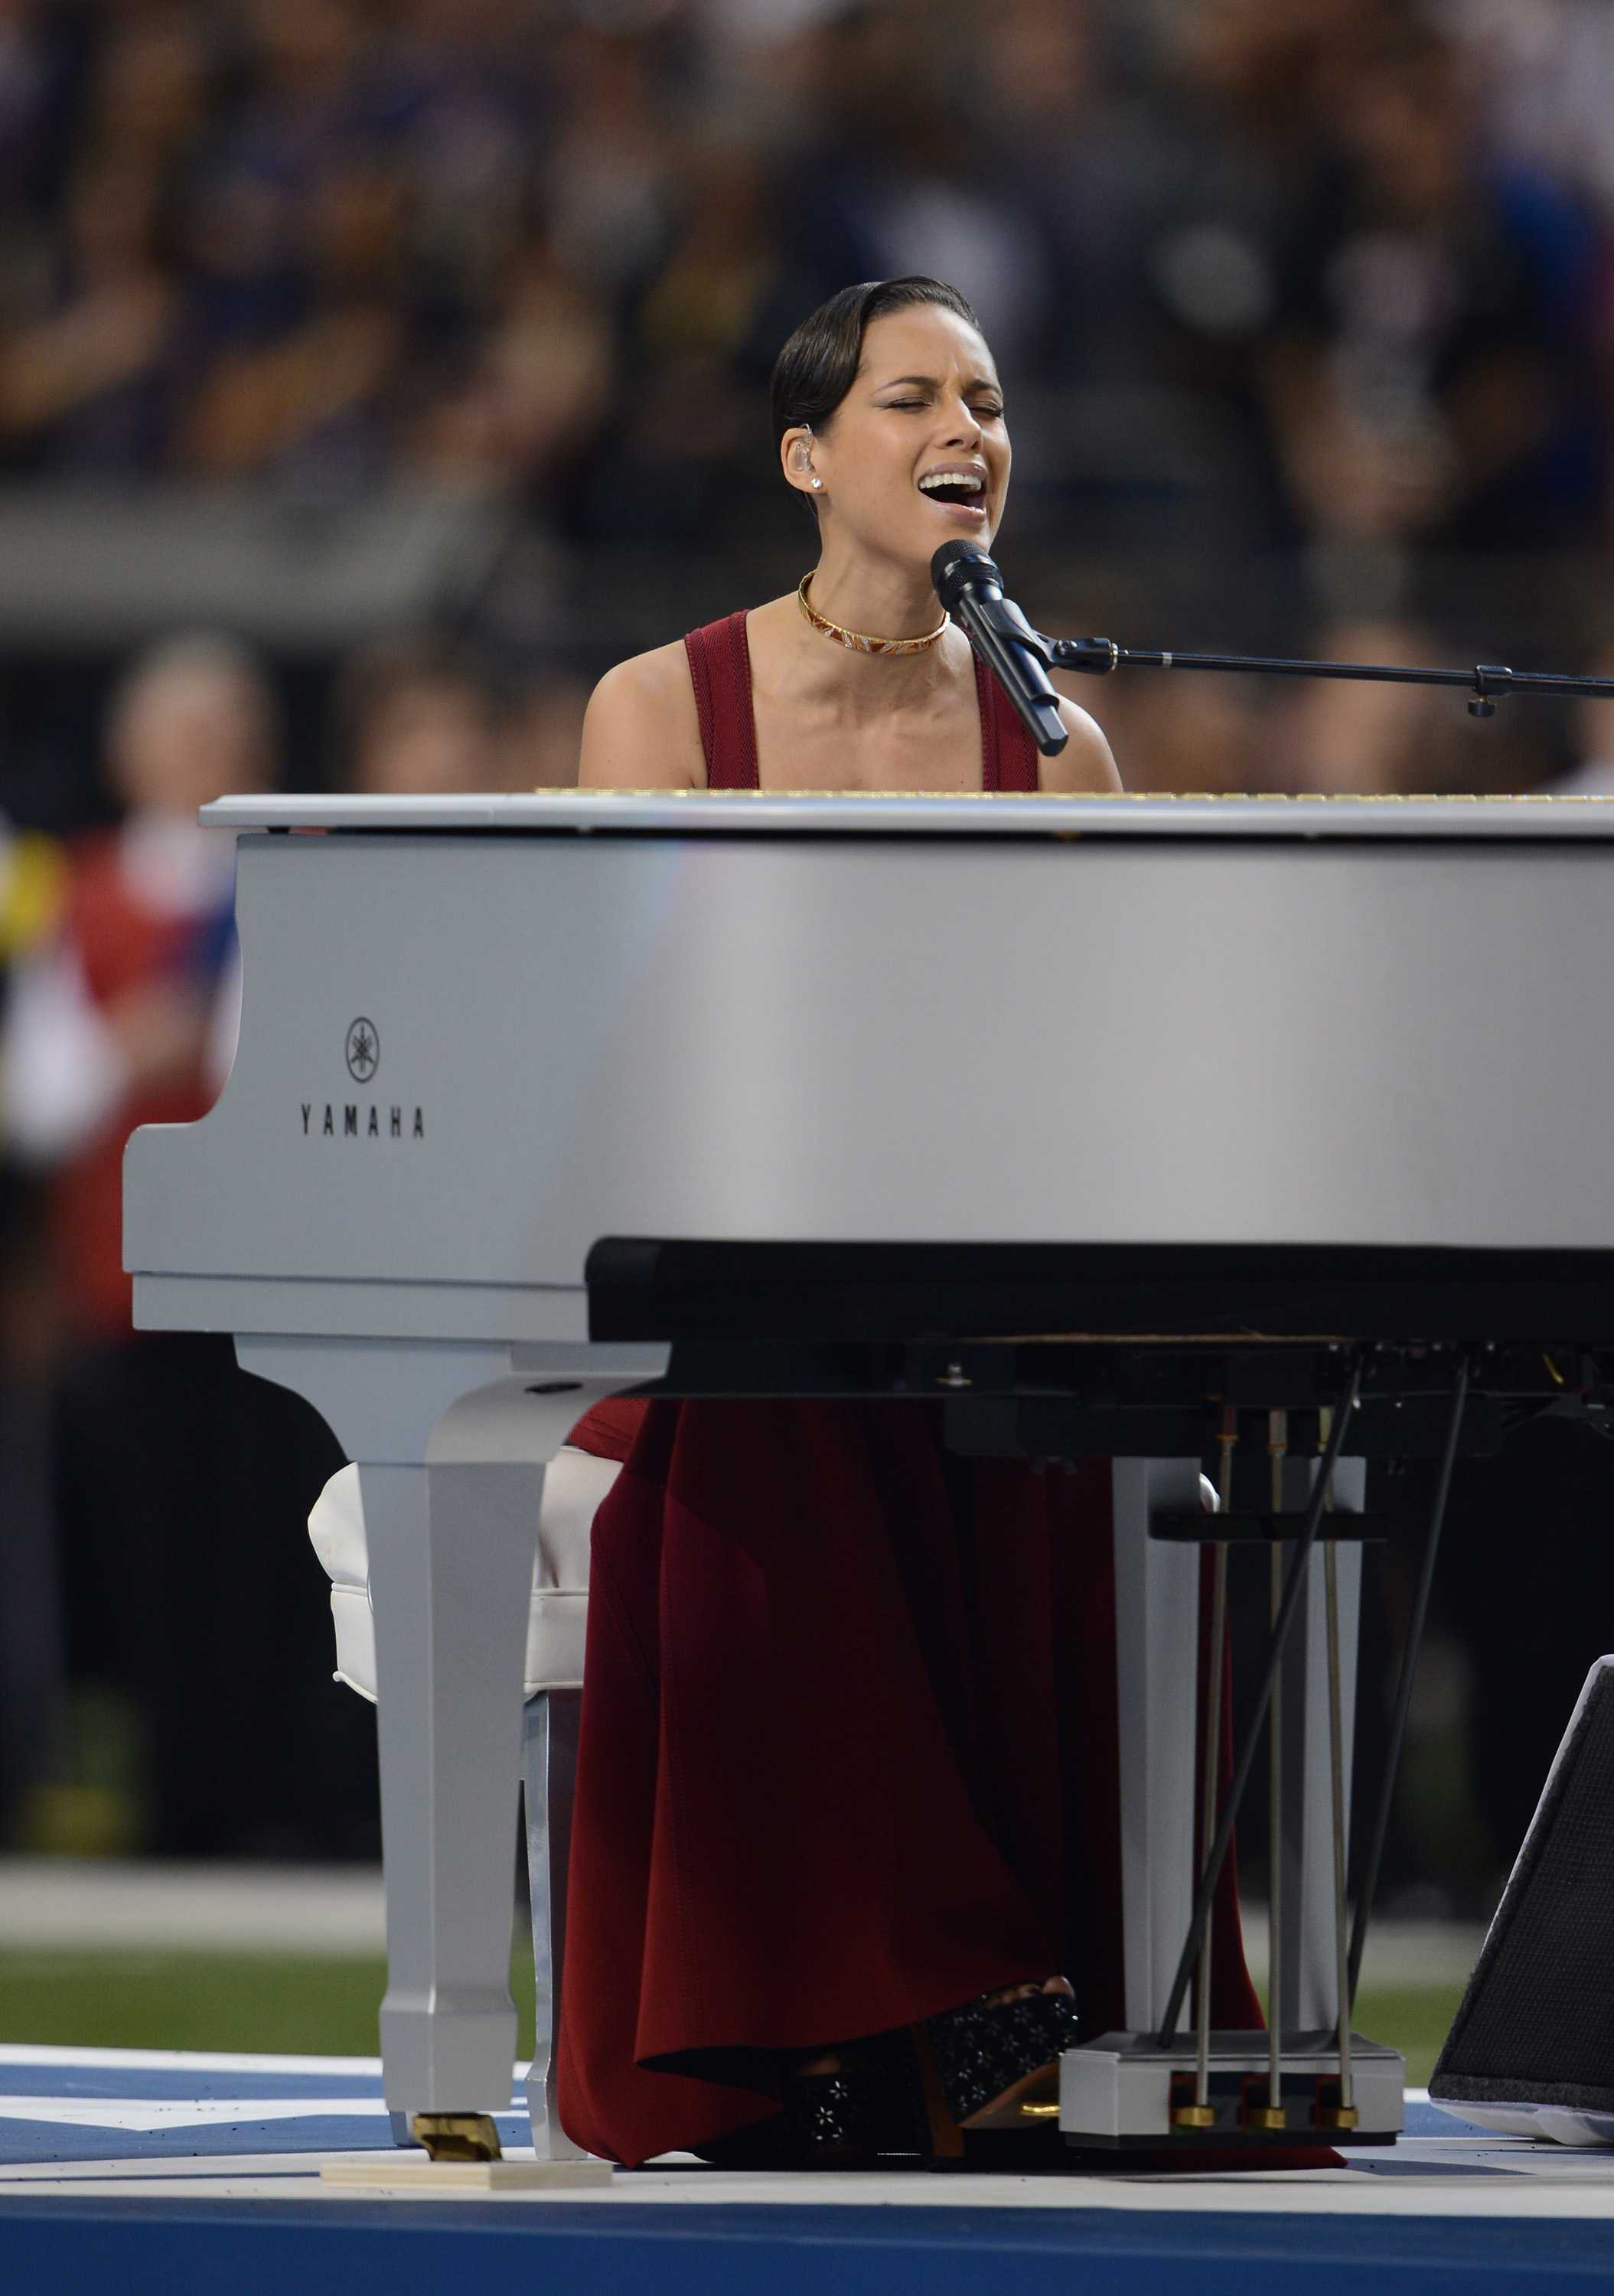 Alicia Keys performs the National Anthem before the start of Super Bowl XLVII at the Mercedes-Benz Superdome in New Orleans, Louisiana, Sunday, February 3, 2013. (Lionel Hahn/Abaca Press/MCT)